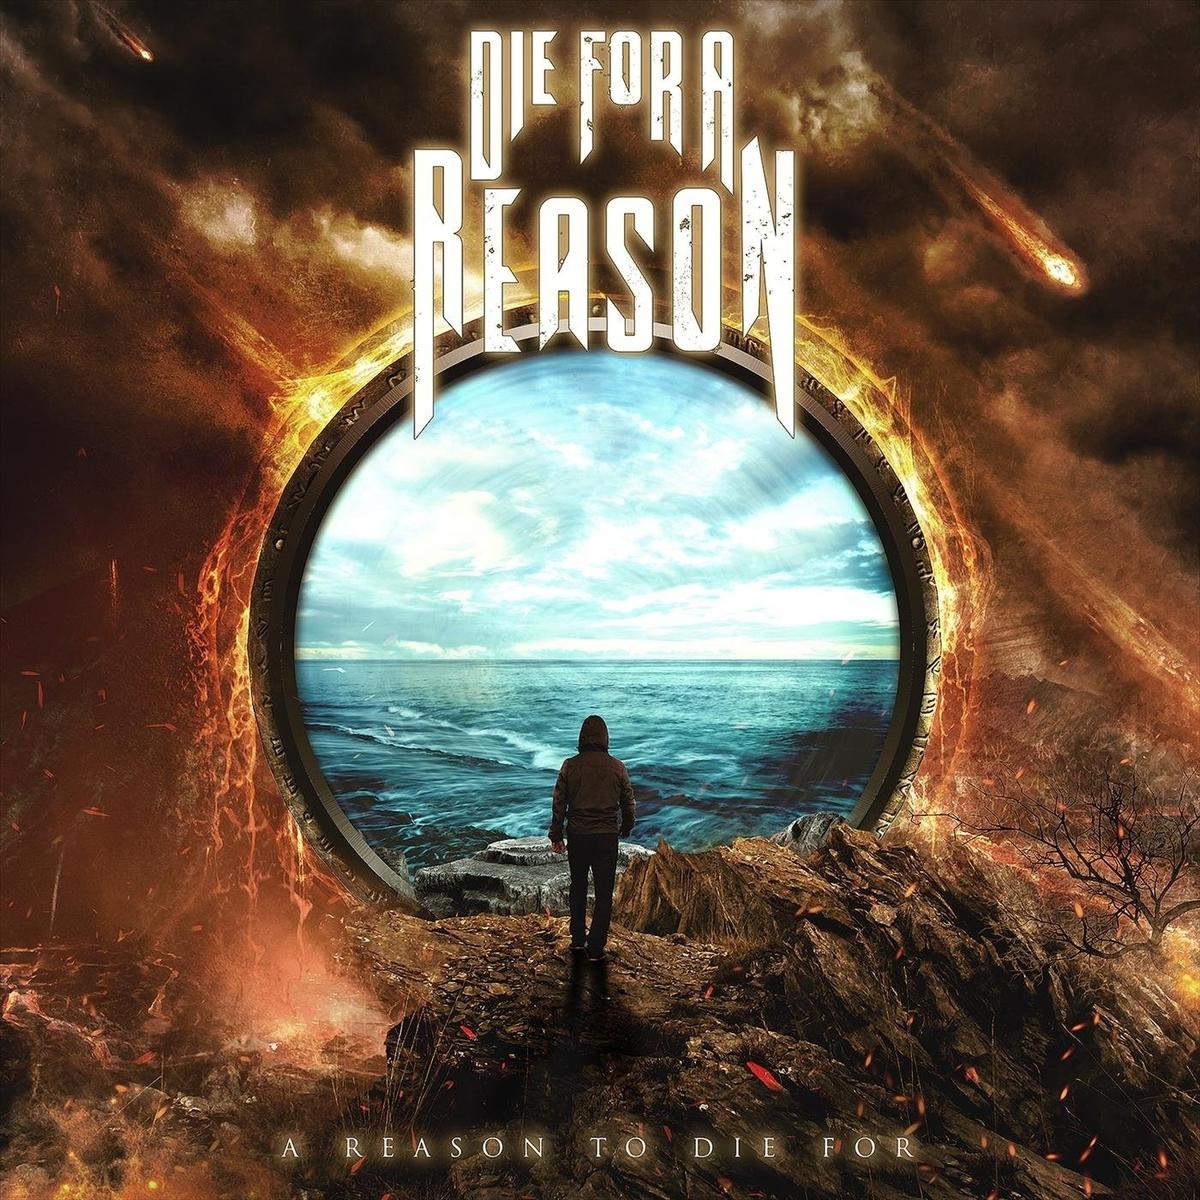 2013 - A Life to die for. Stereoside Stereoside 2010. My reason to die. My reason to die Cover. Come to reason